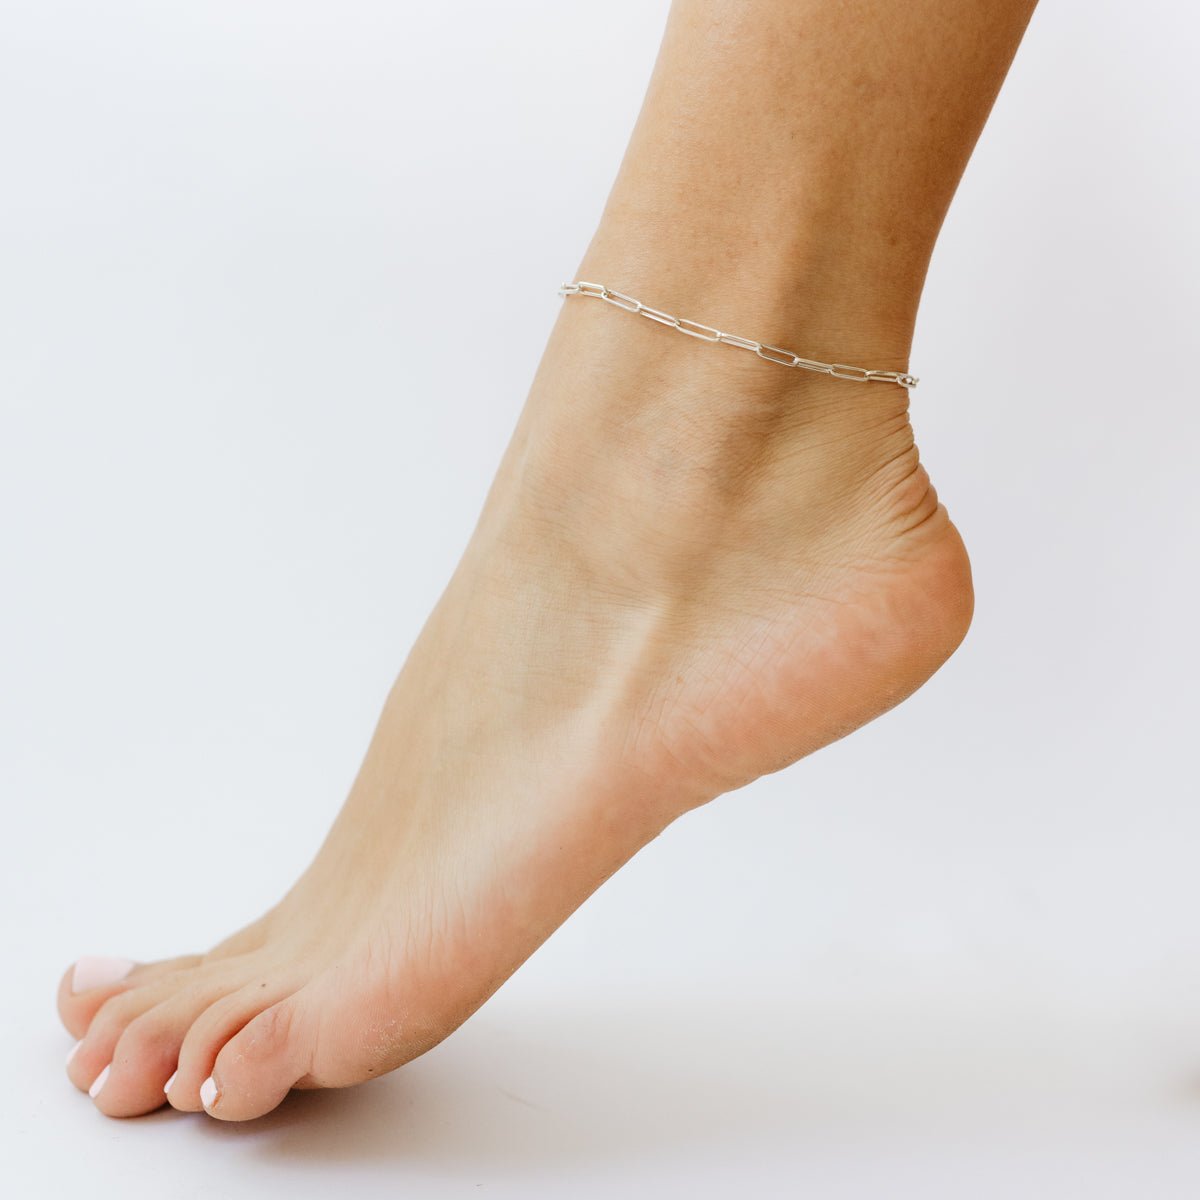 POISE OVAL LINK ANKLET - SILVER - SO PRETTY CARA COTTER